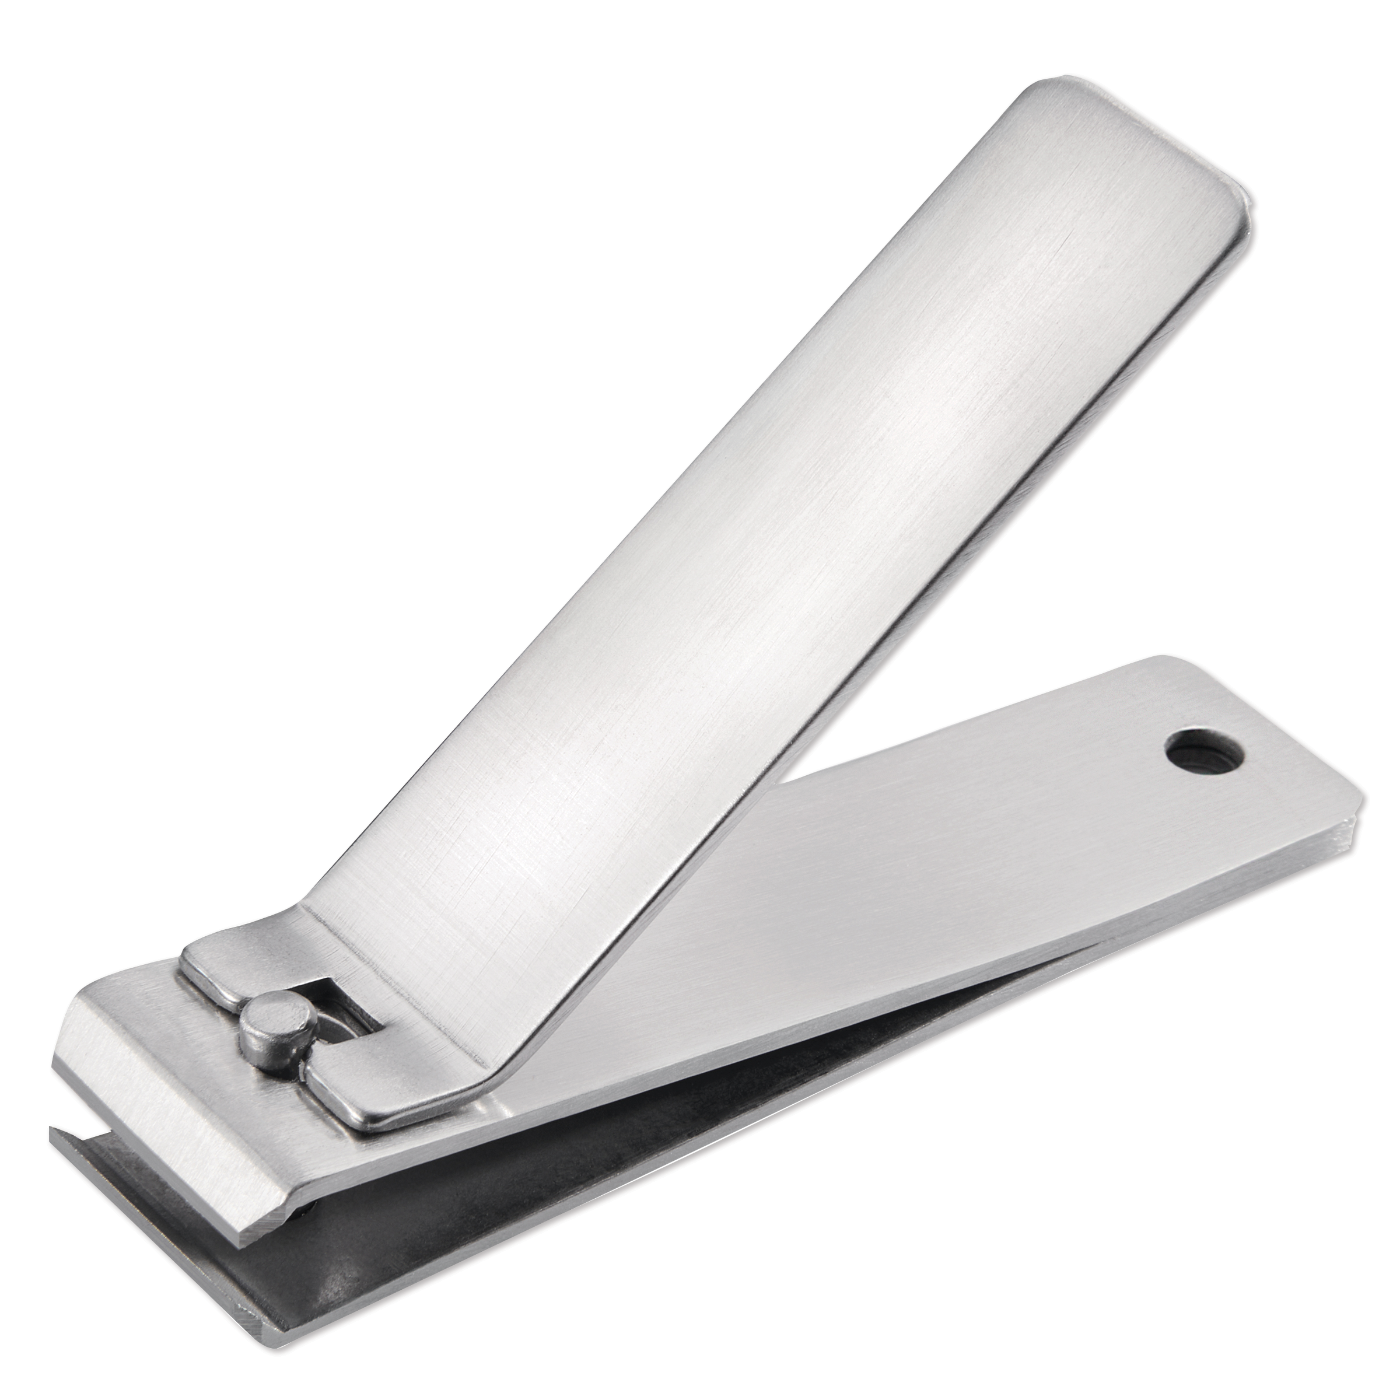 Toenail Clipper, Stainless Steel - Straight Wide Blade